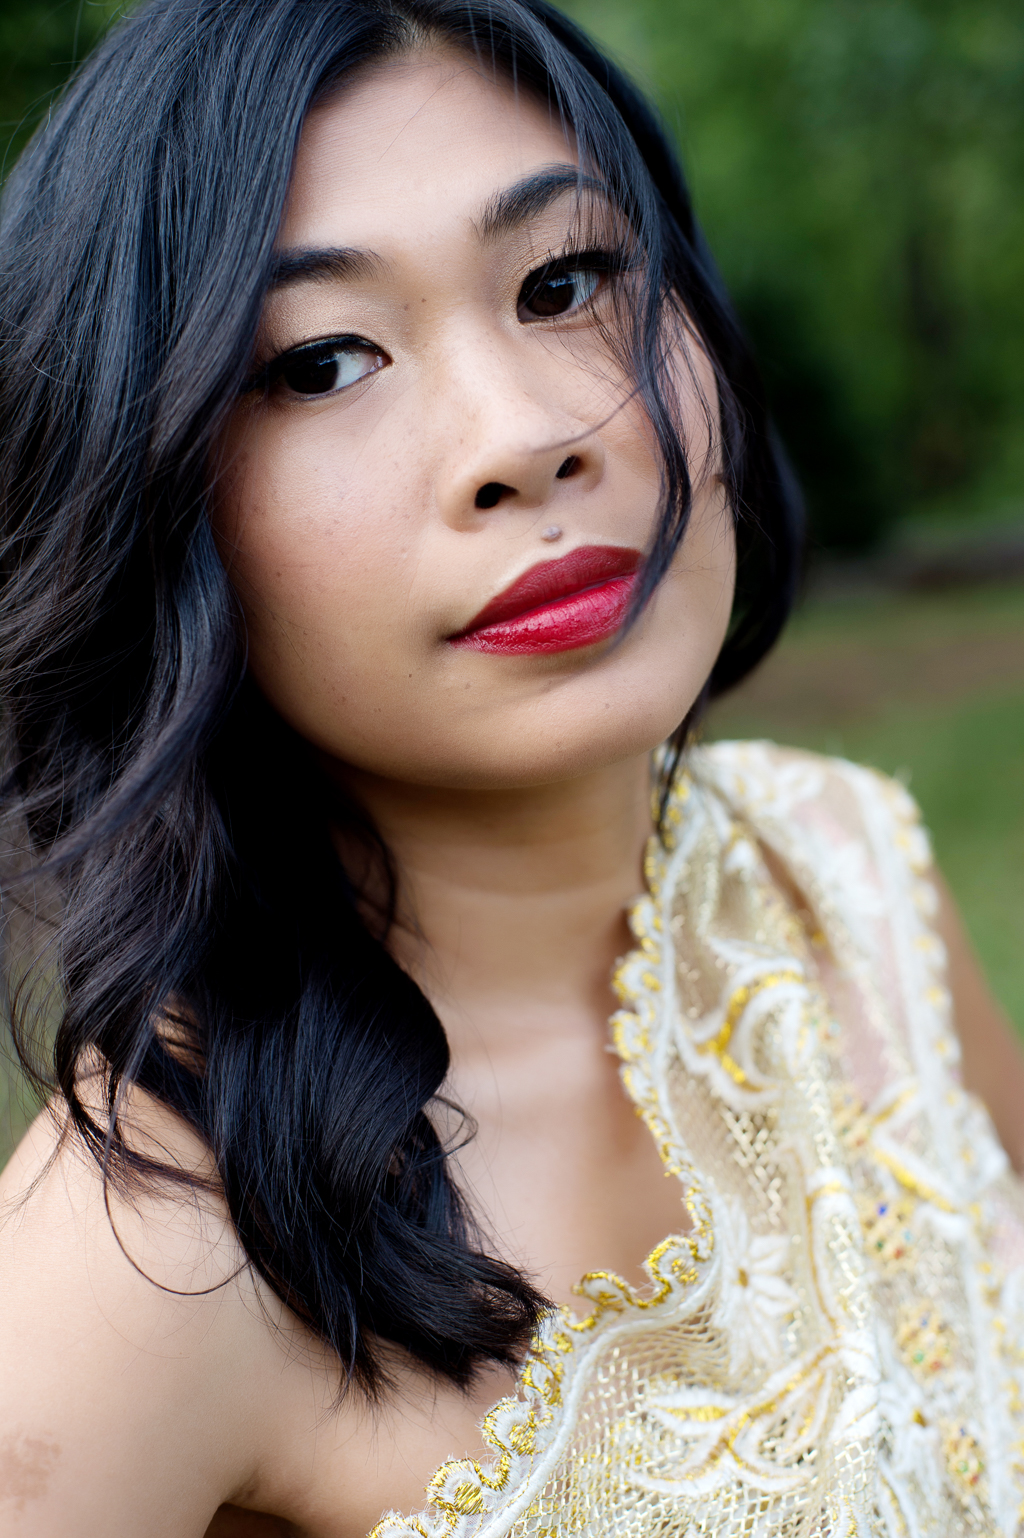 a woman in traditional gold cambodian wedding attire and red lipstick looks intently at the camera